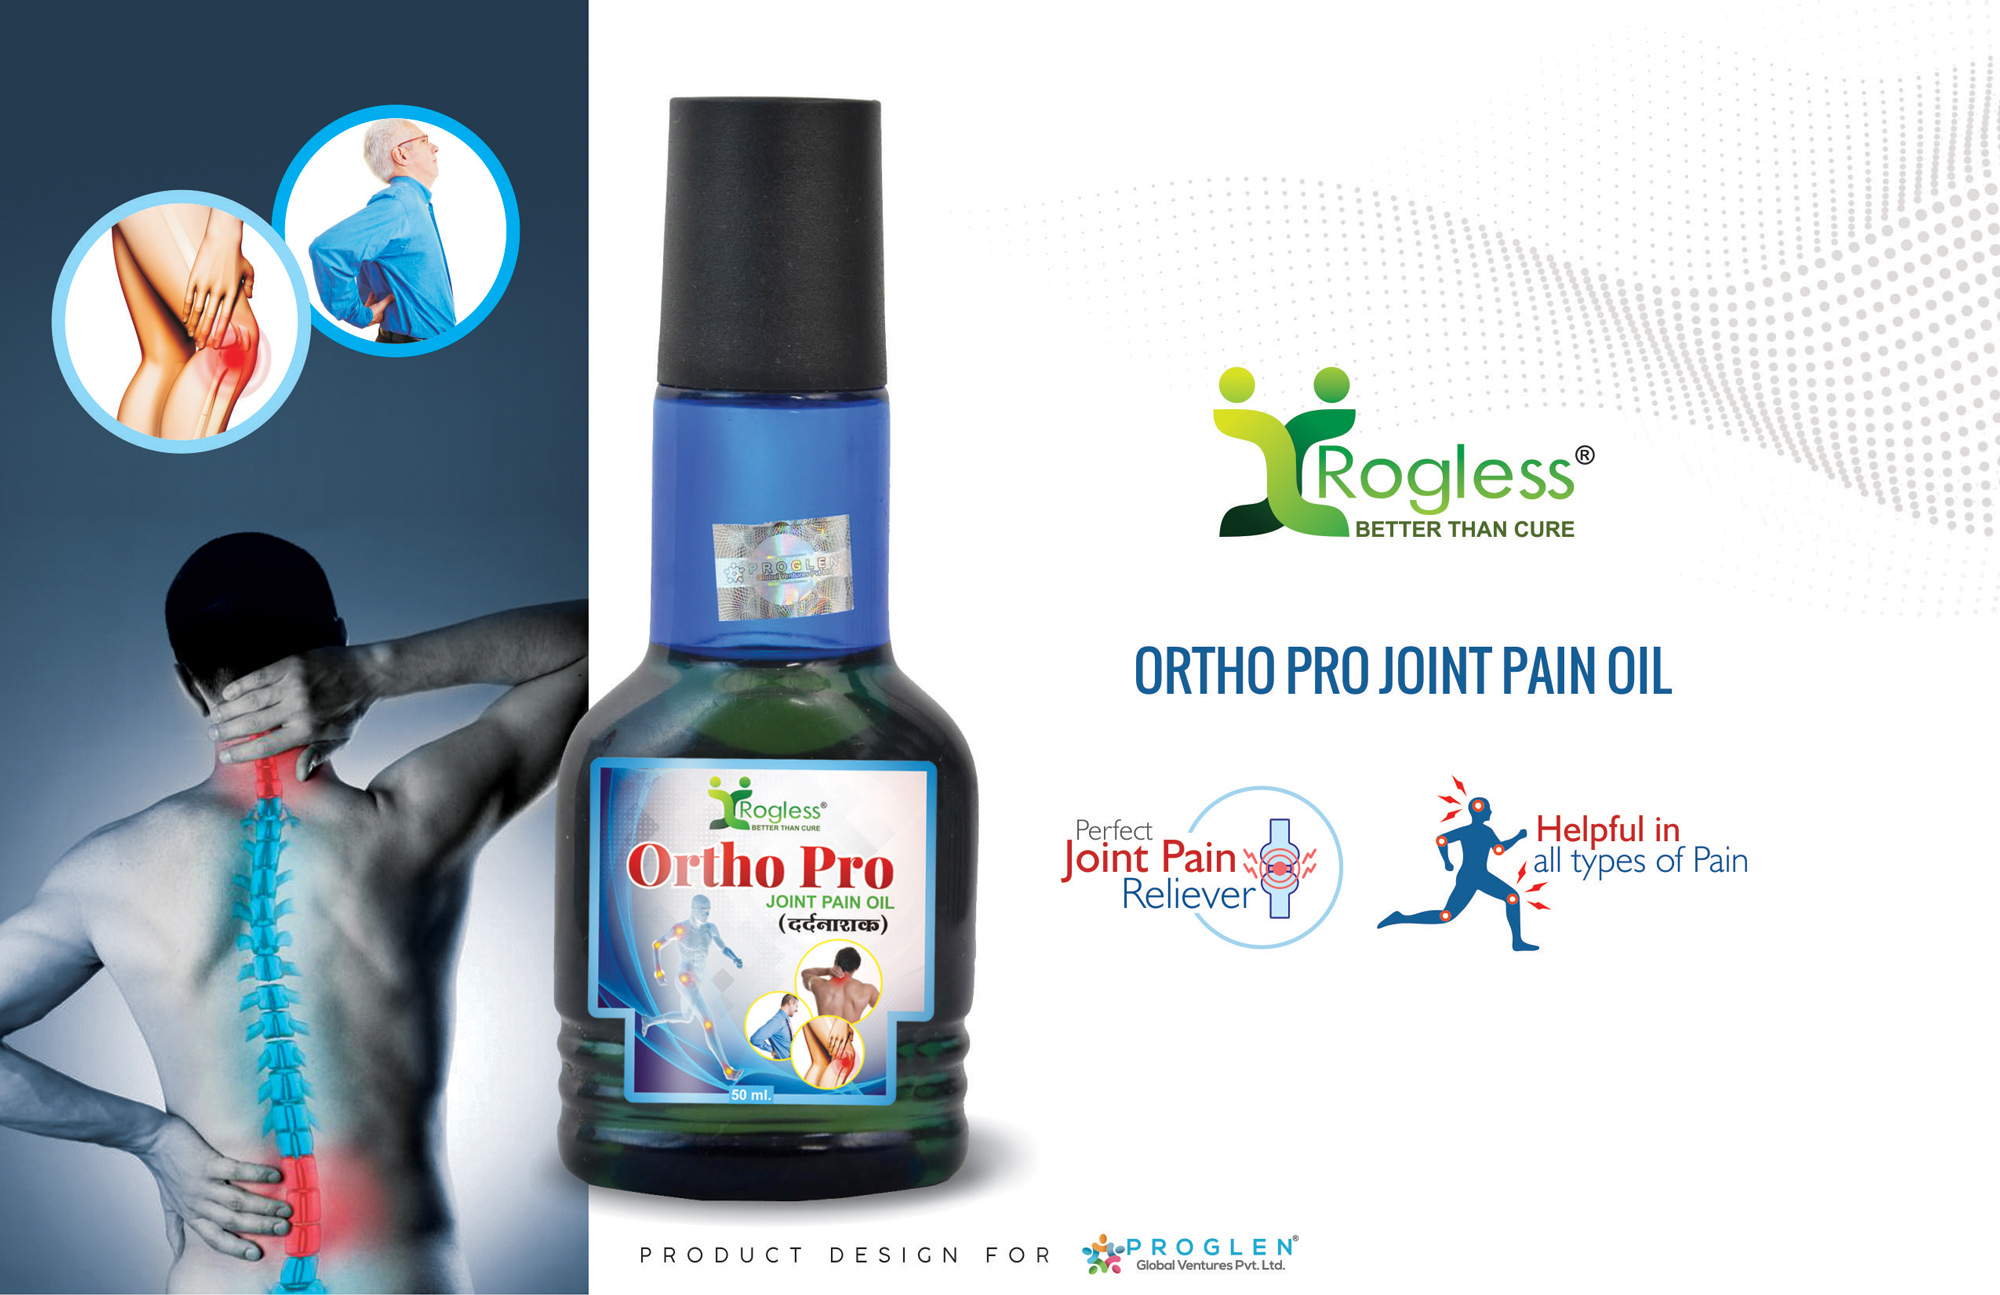 Rogless Ortho Pro Joint Pain Oil